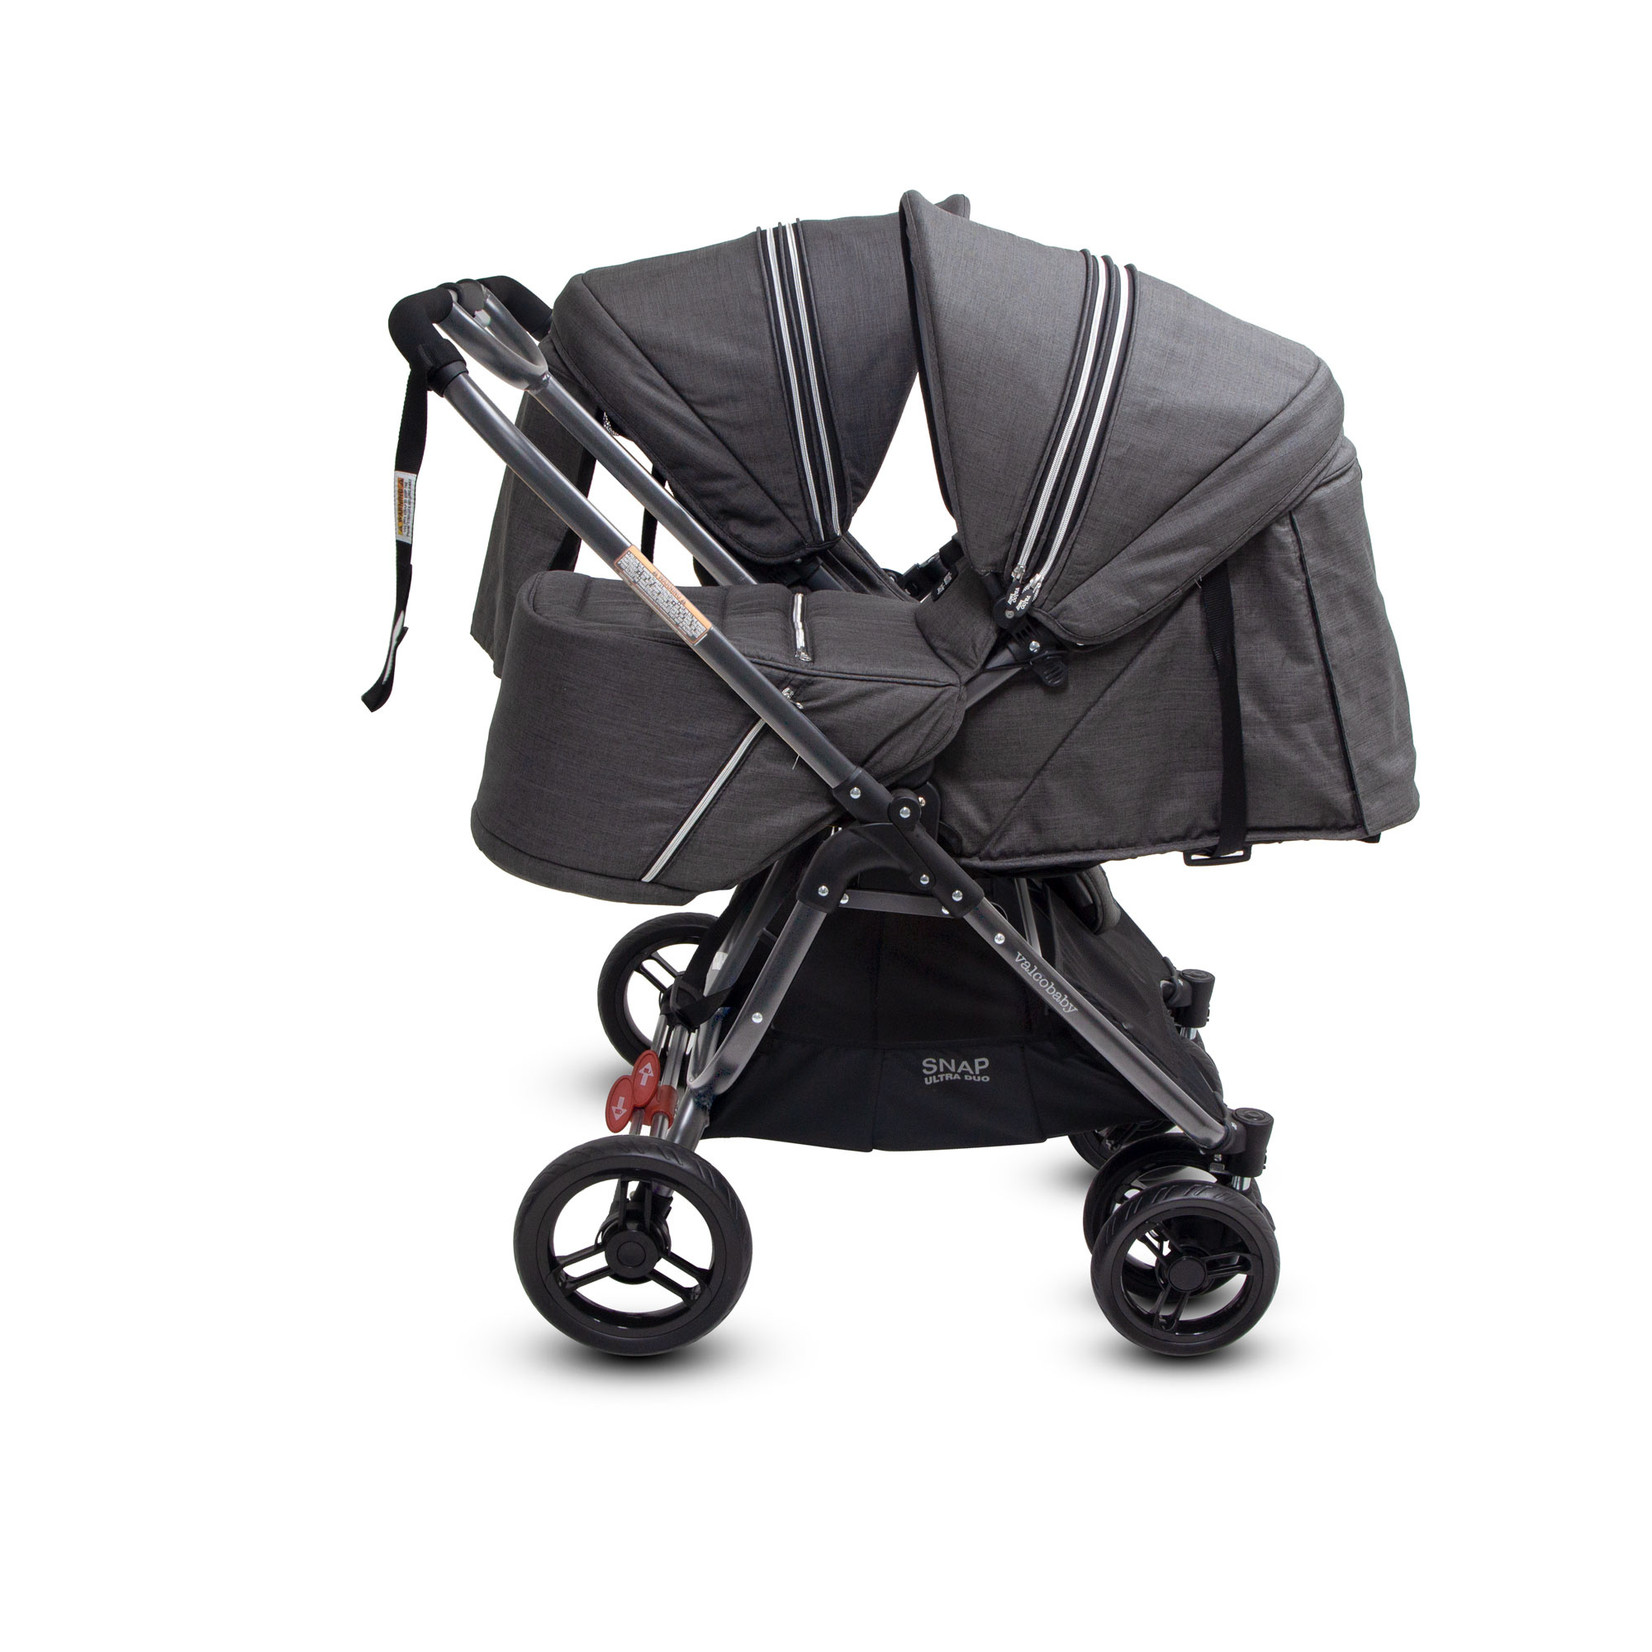 Valco Baby Snap Ultra Duo Tailormade-Charcoal